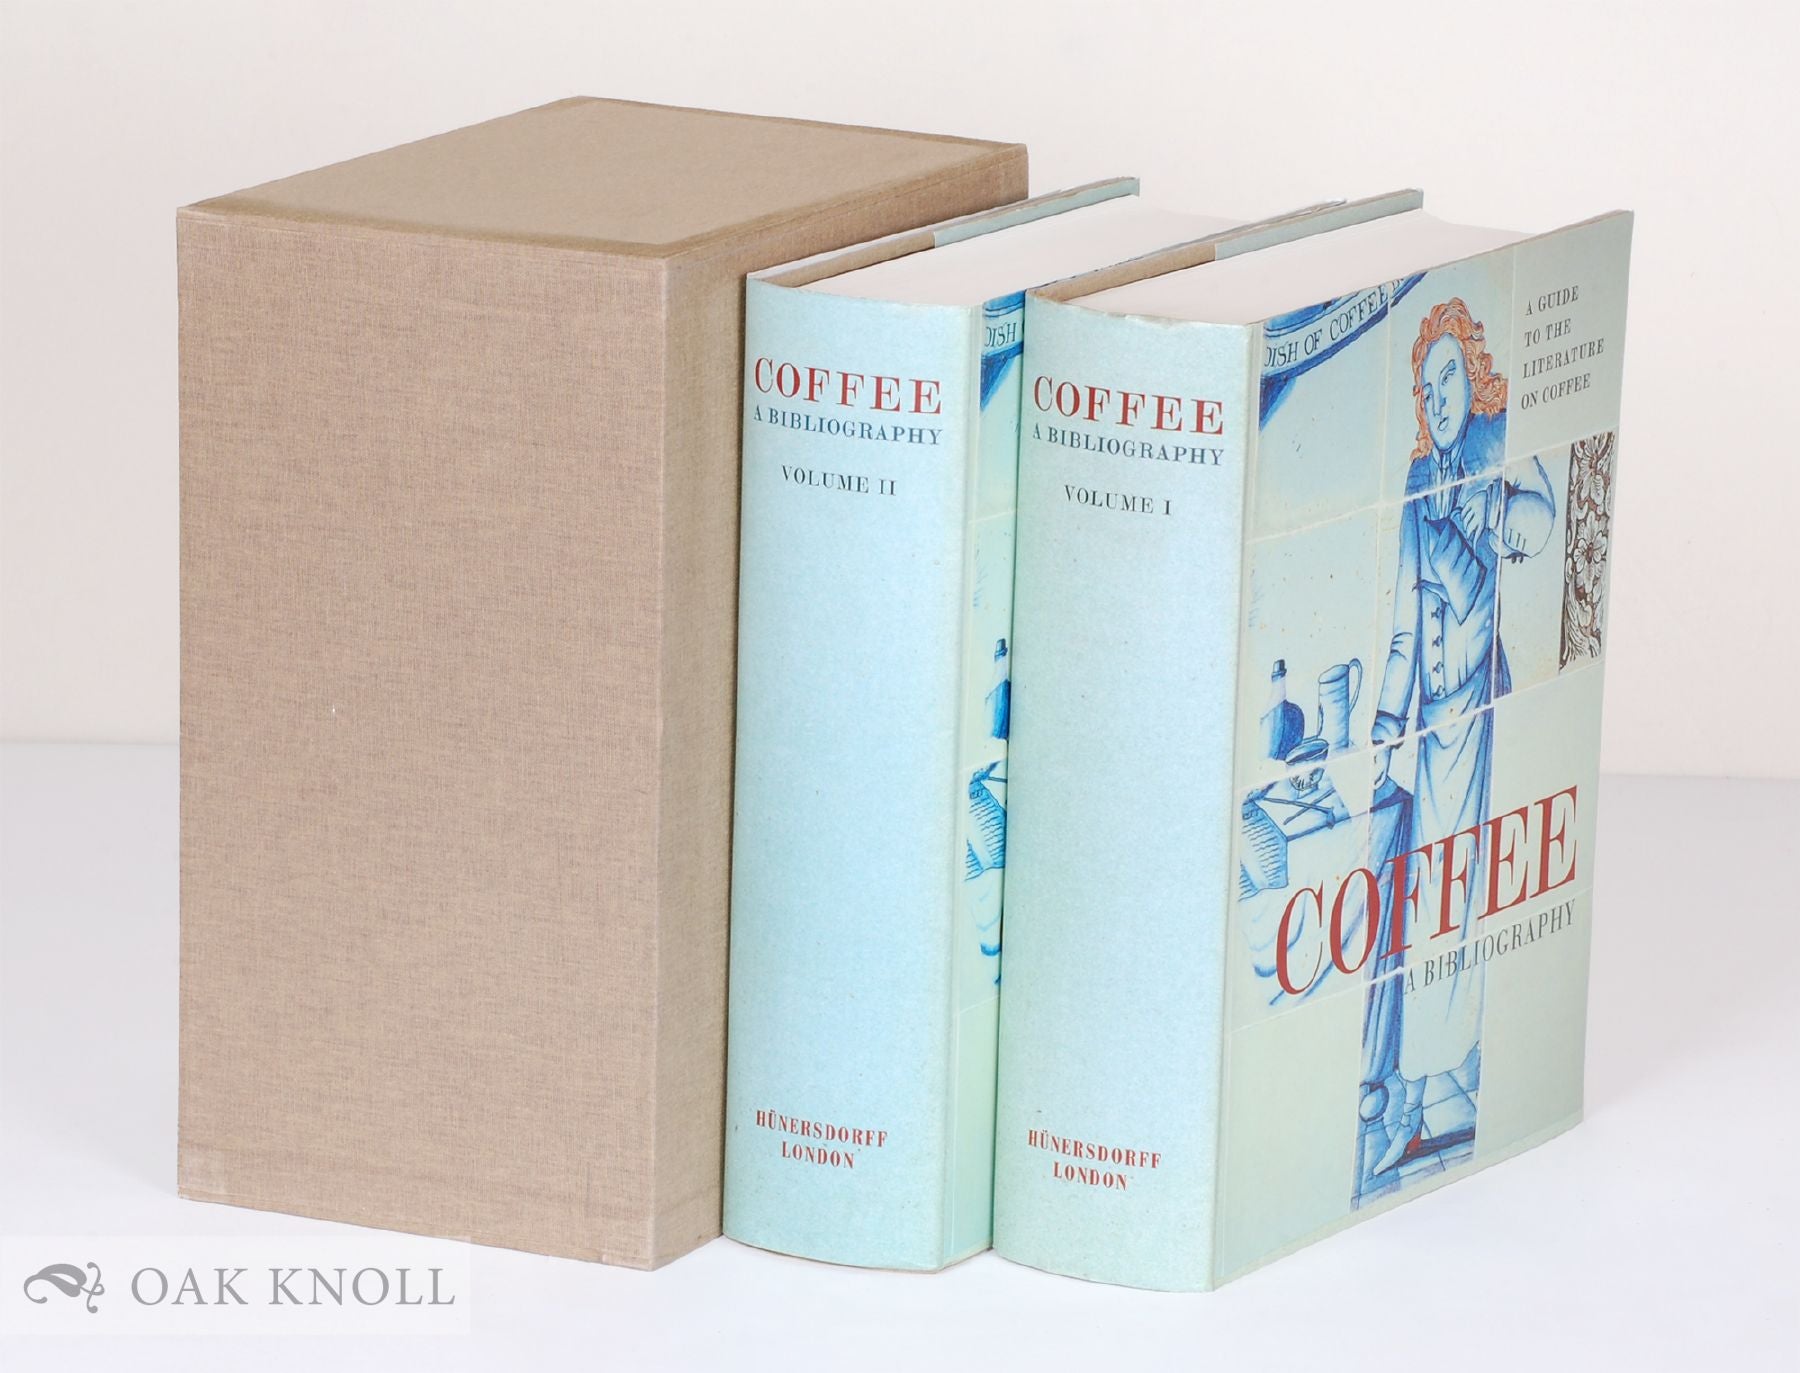 COFFEE: A BIBLIOGRAPHY, A GUIDE TO THE LITERATURE OF COFFEE